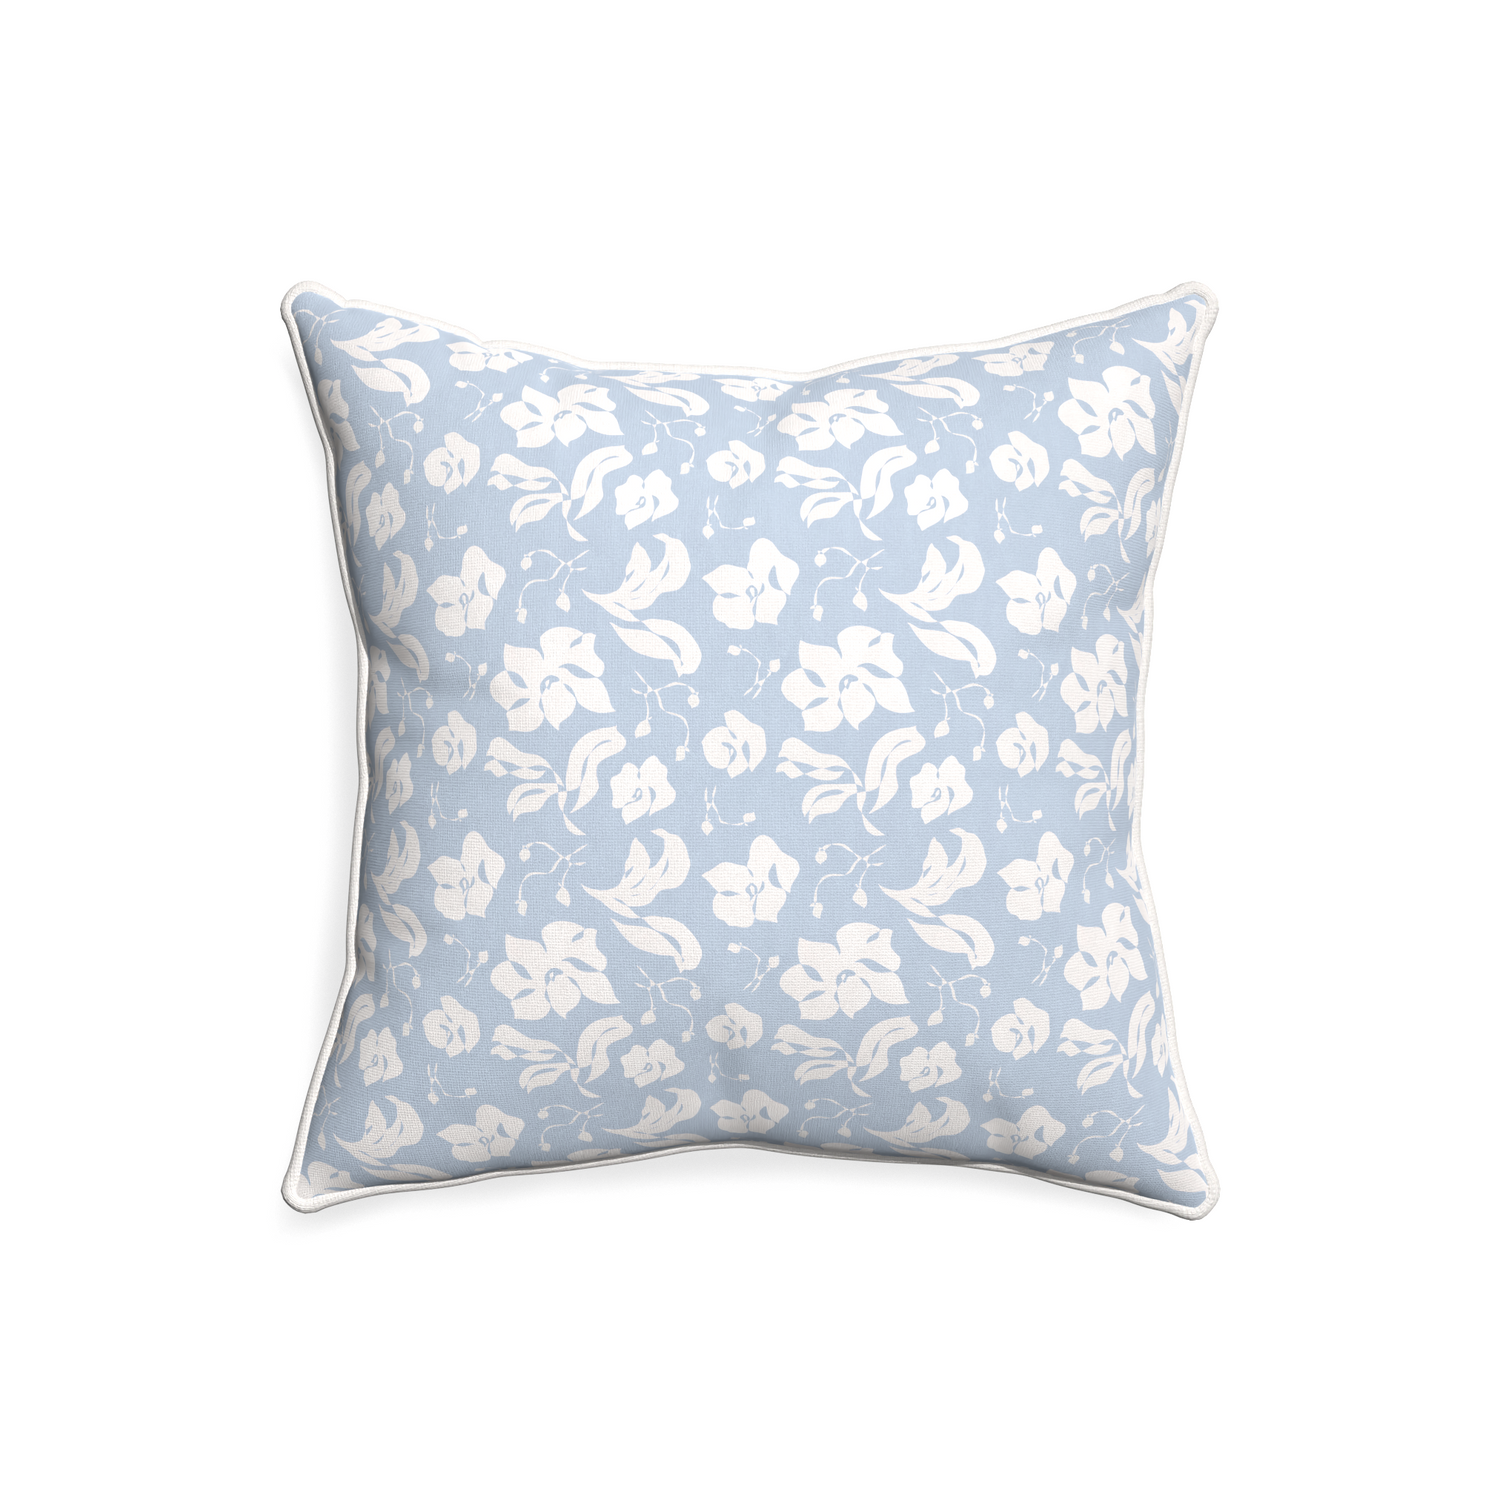 20-square georgia custom cornflower blue floralpillow with snow piping on white background